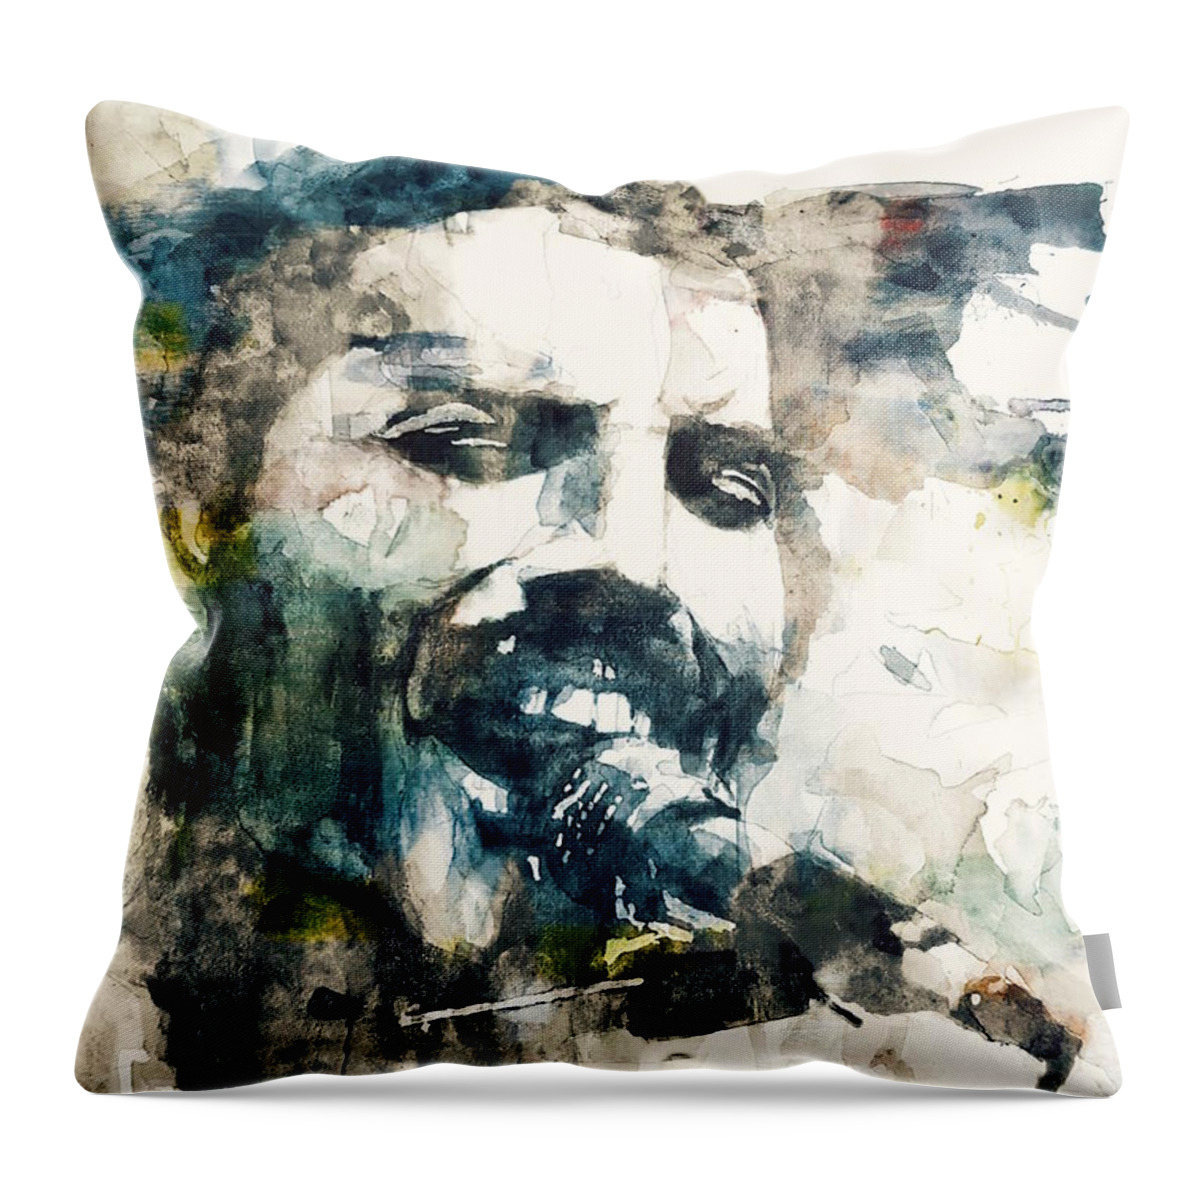 Queen Throw Pillow featuring the painting Freddie Mercury - Killer Queen by Paul Lovering